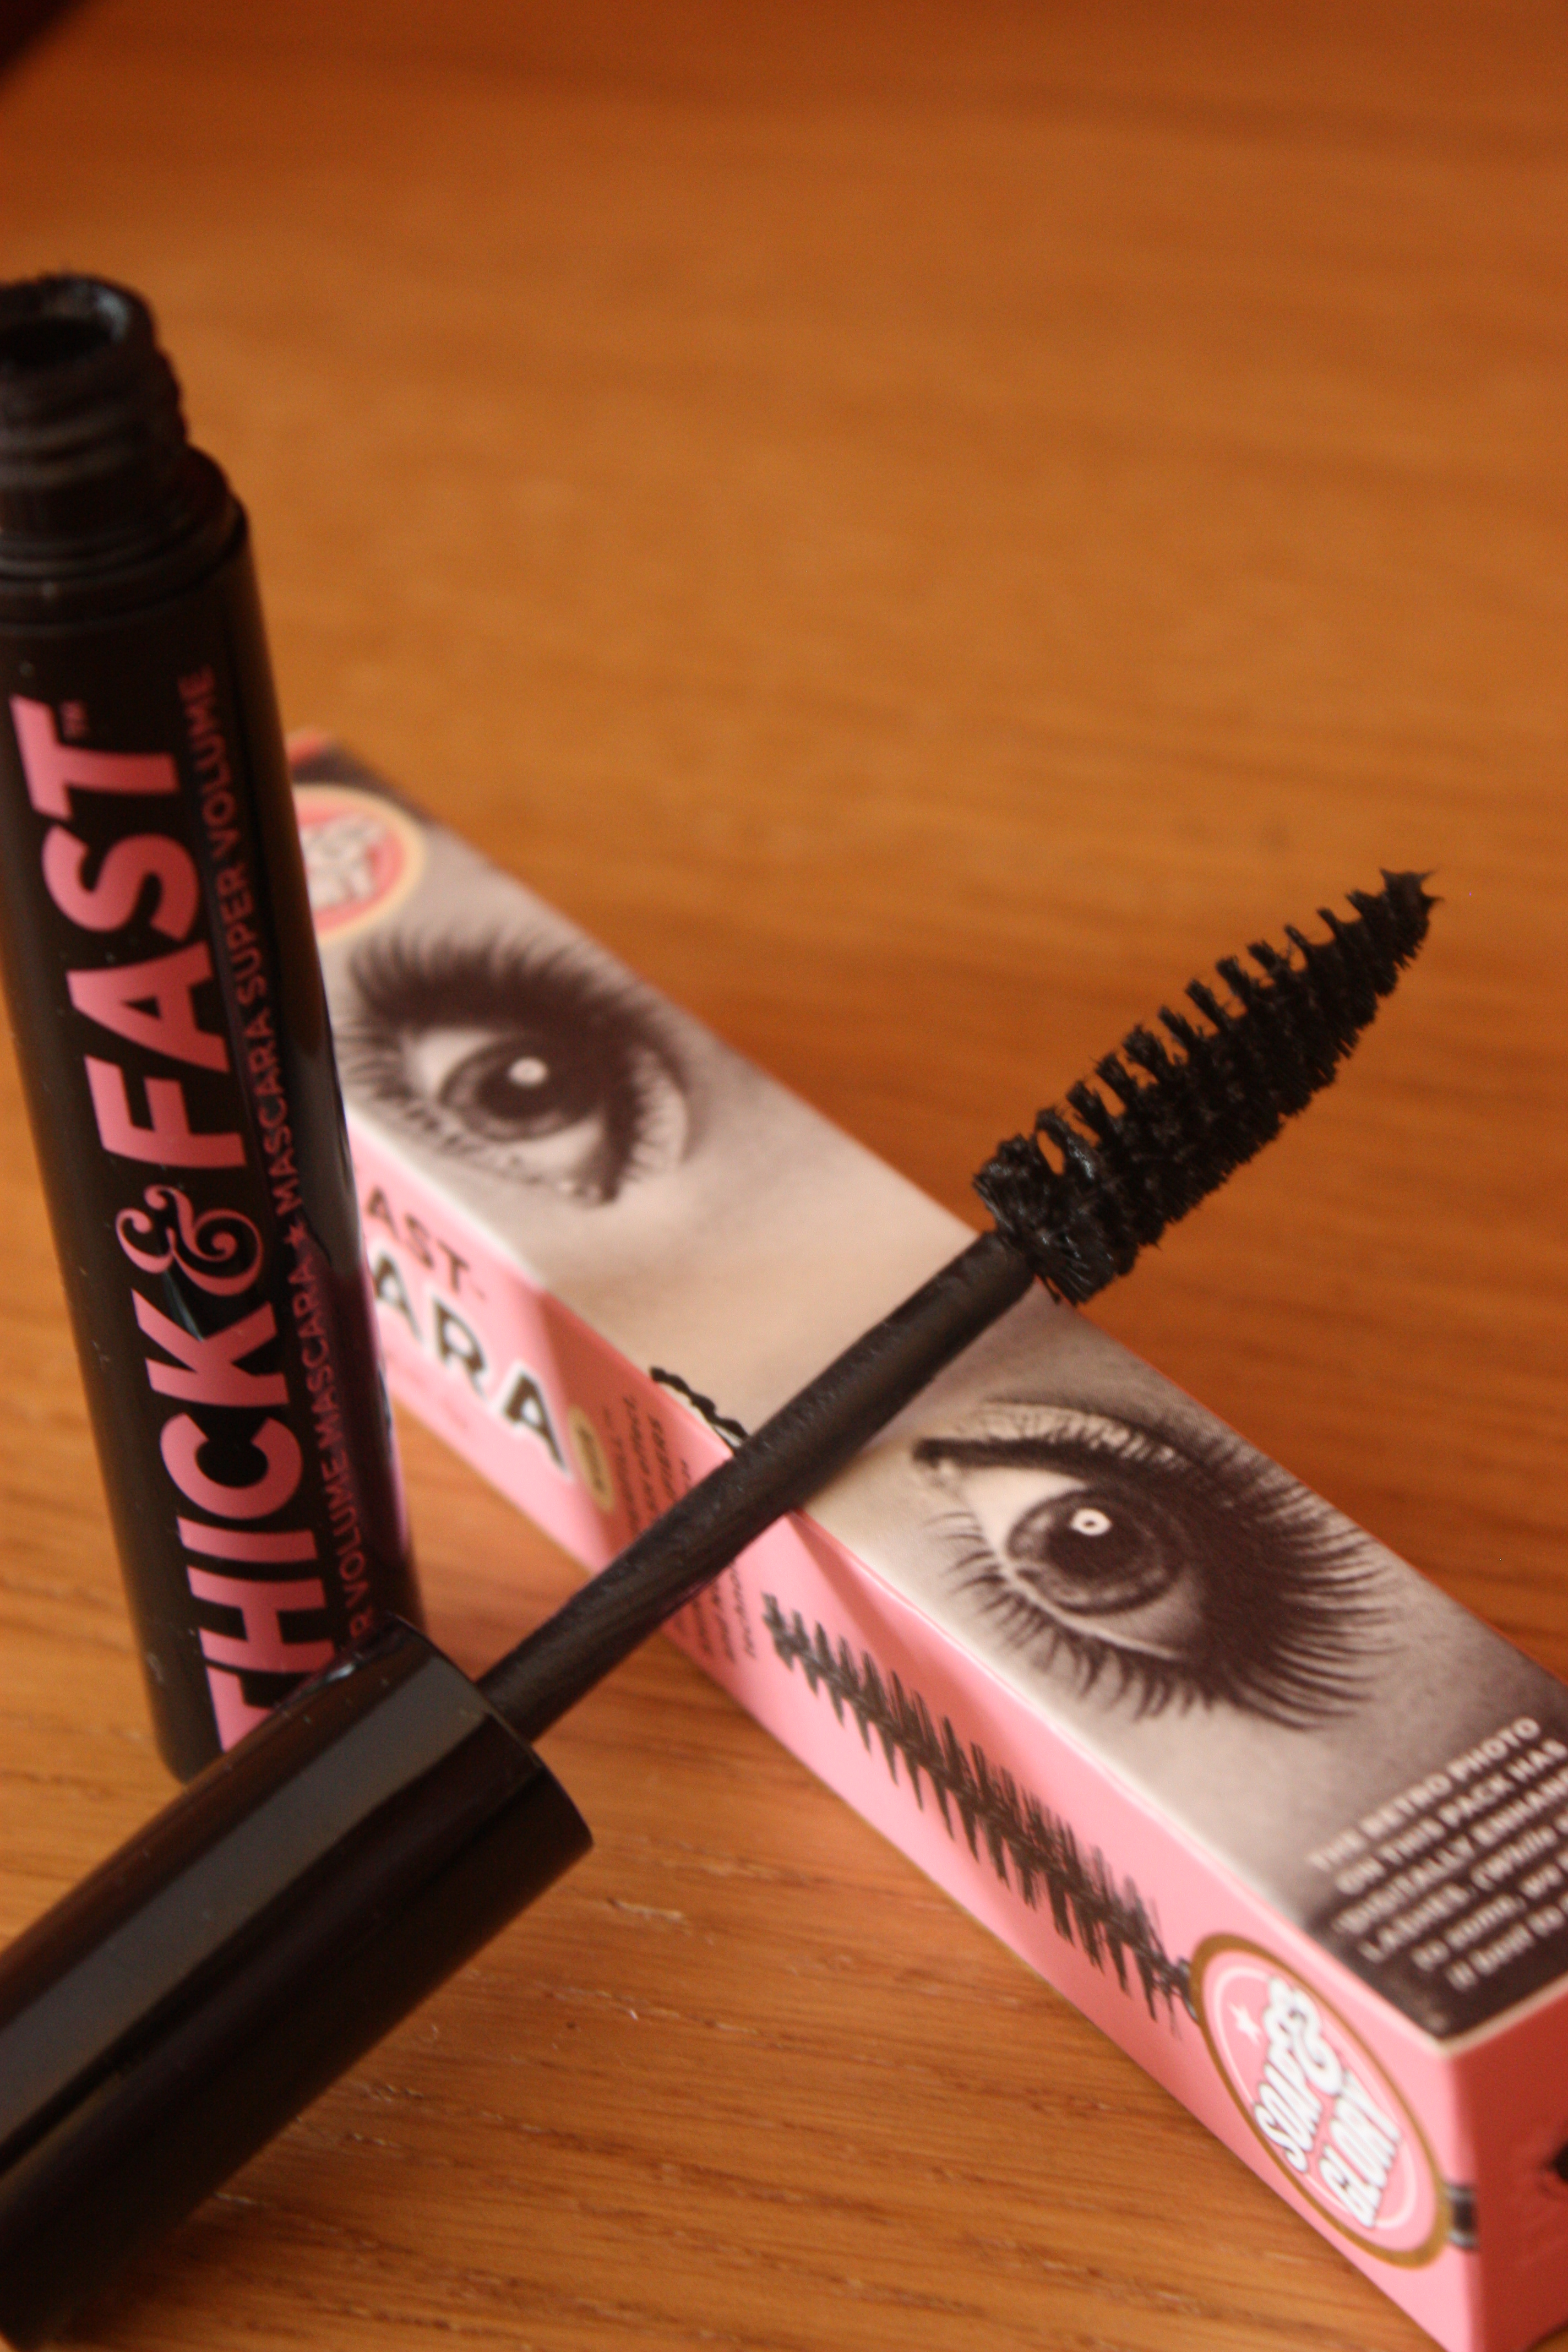 Soap and Glory Thick & Fast Mascara in Super Jet Black - although I fear the wand may be too big for my stupidly short lashes :-(